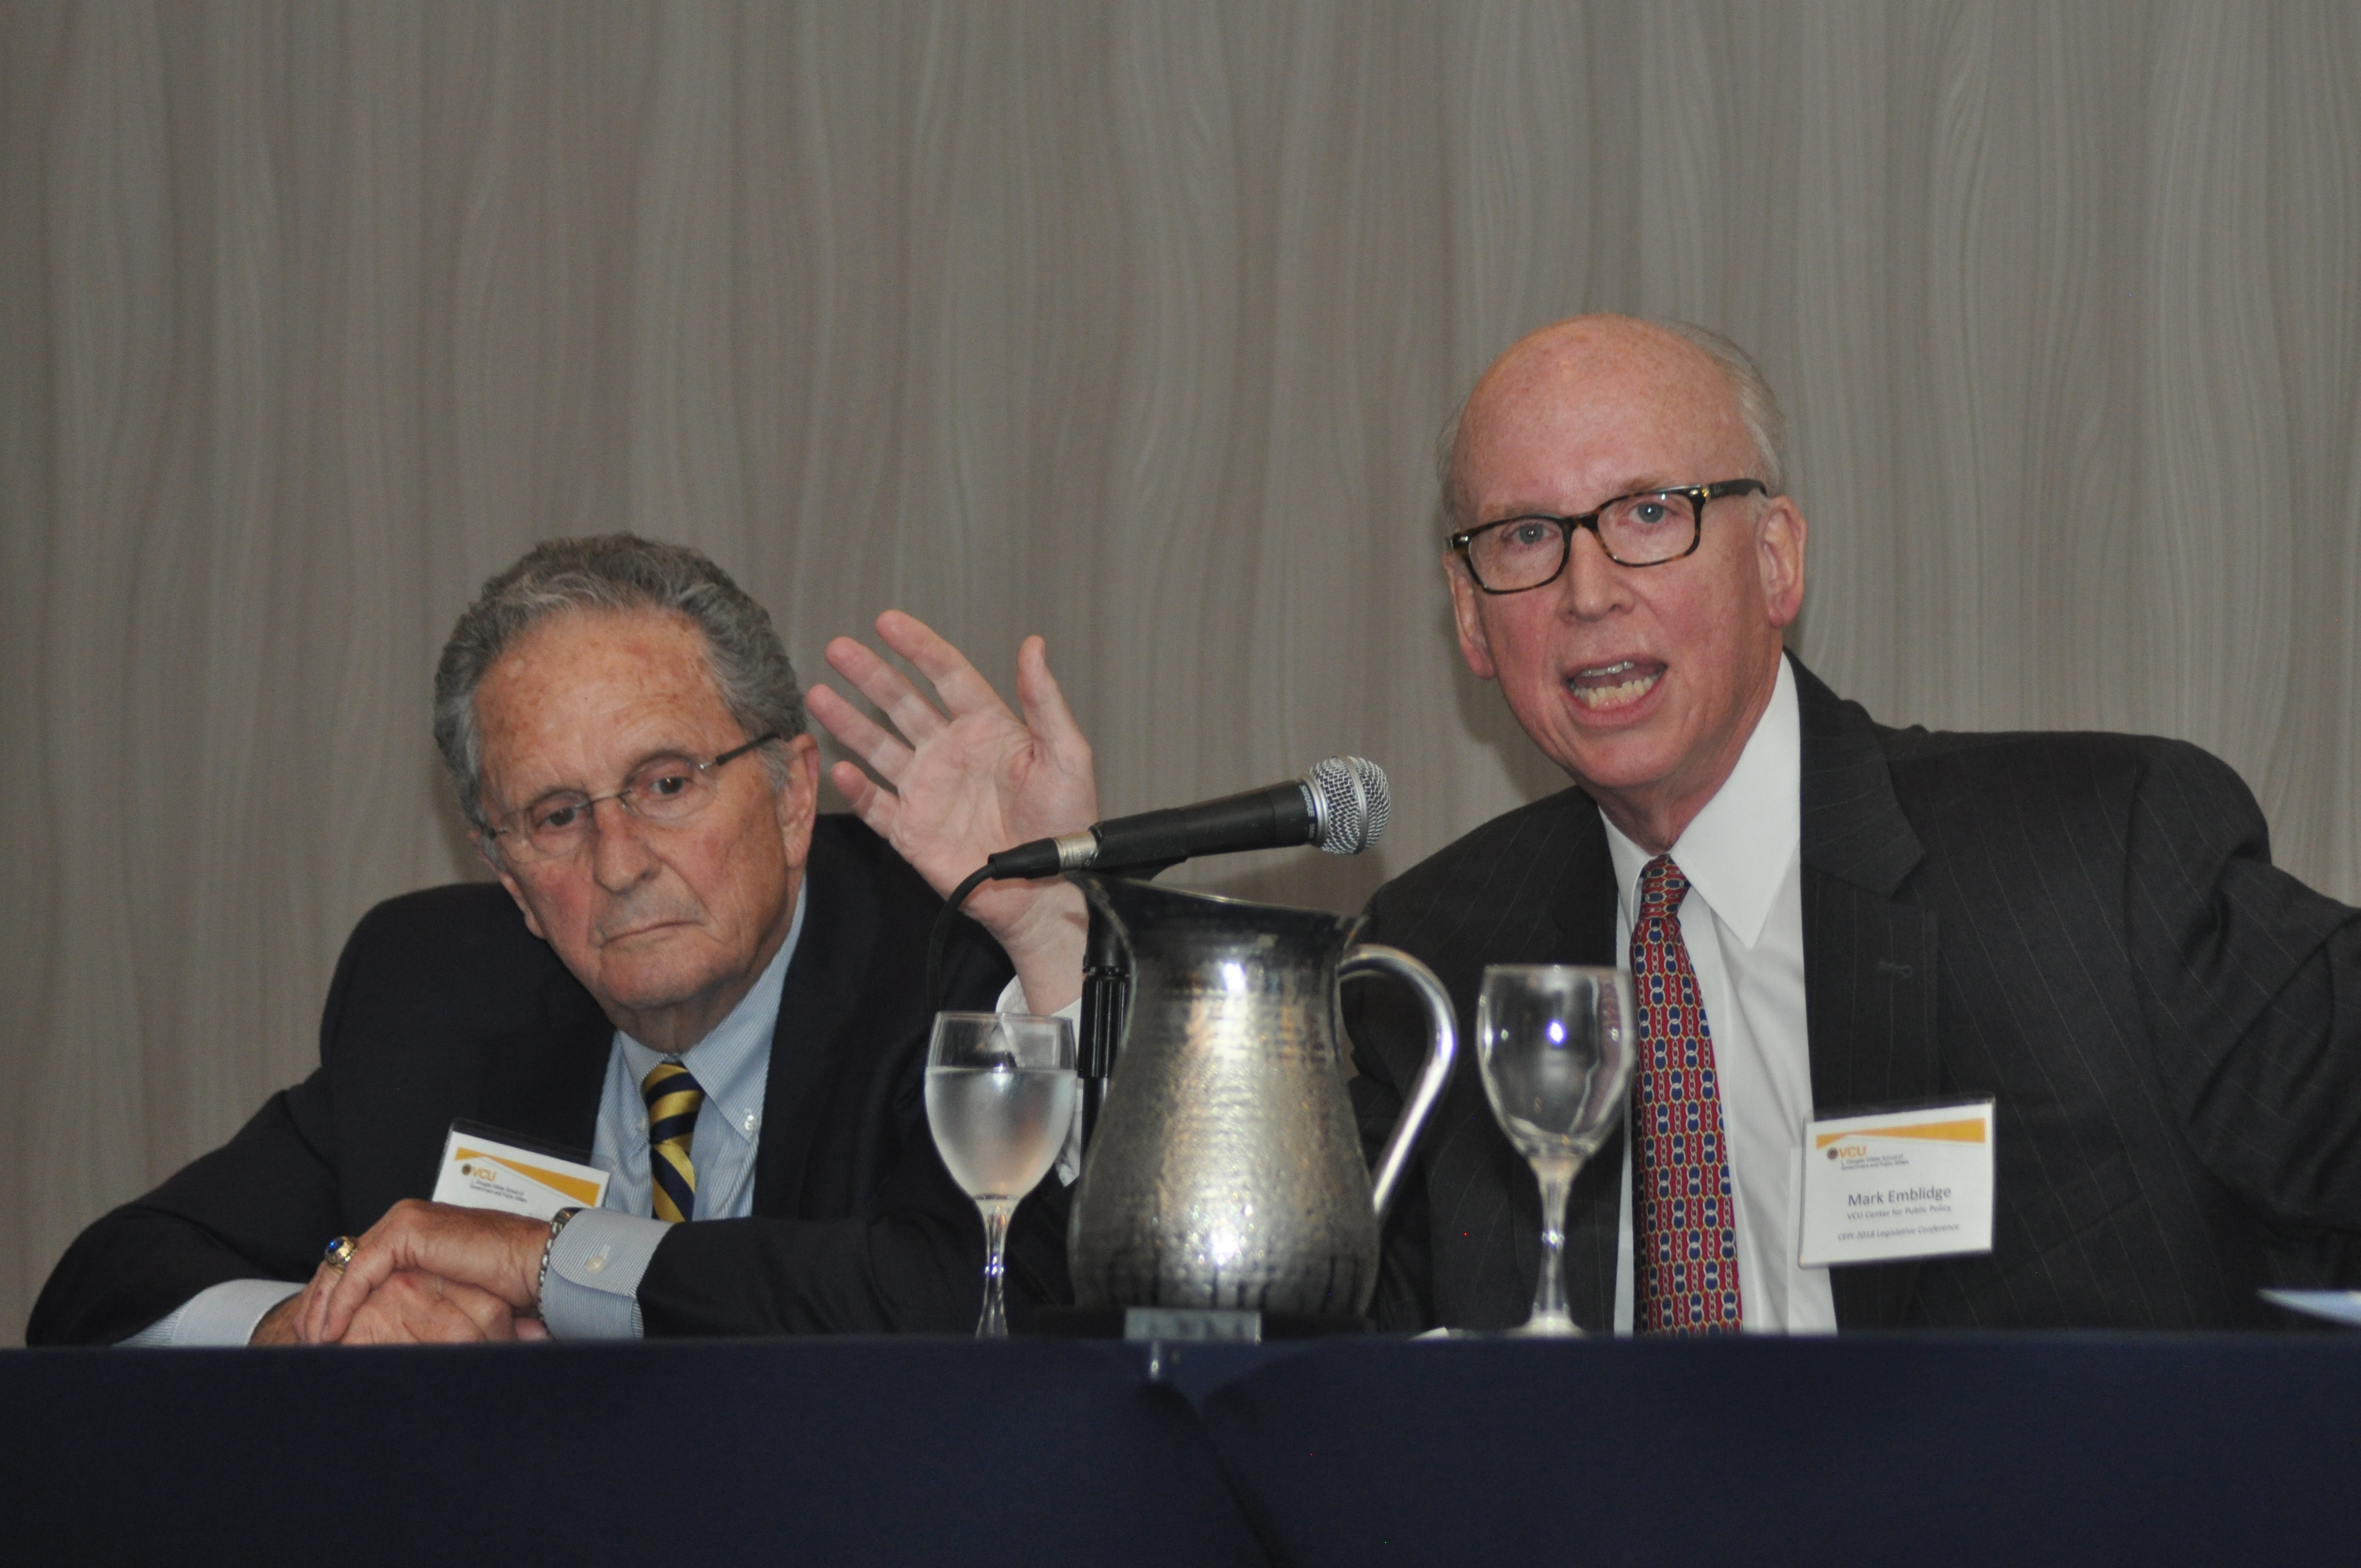  Dr. Mark Emblidge of the Center for Public Policy (right) offers insight as Dr. Richard Vacca listens during the CEPI 2018 Legislative Conference.